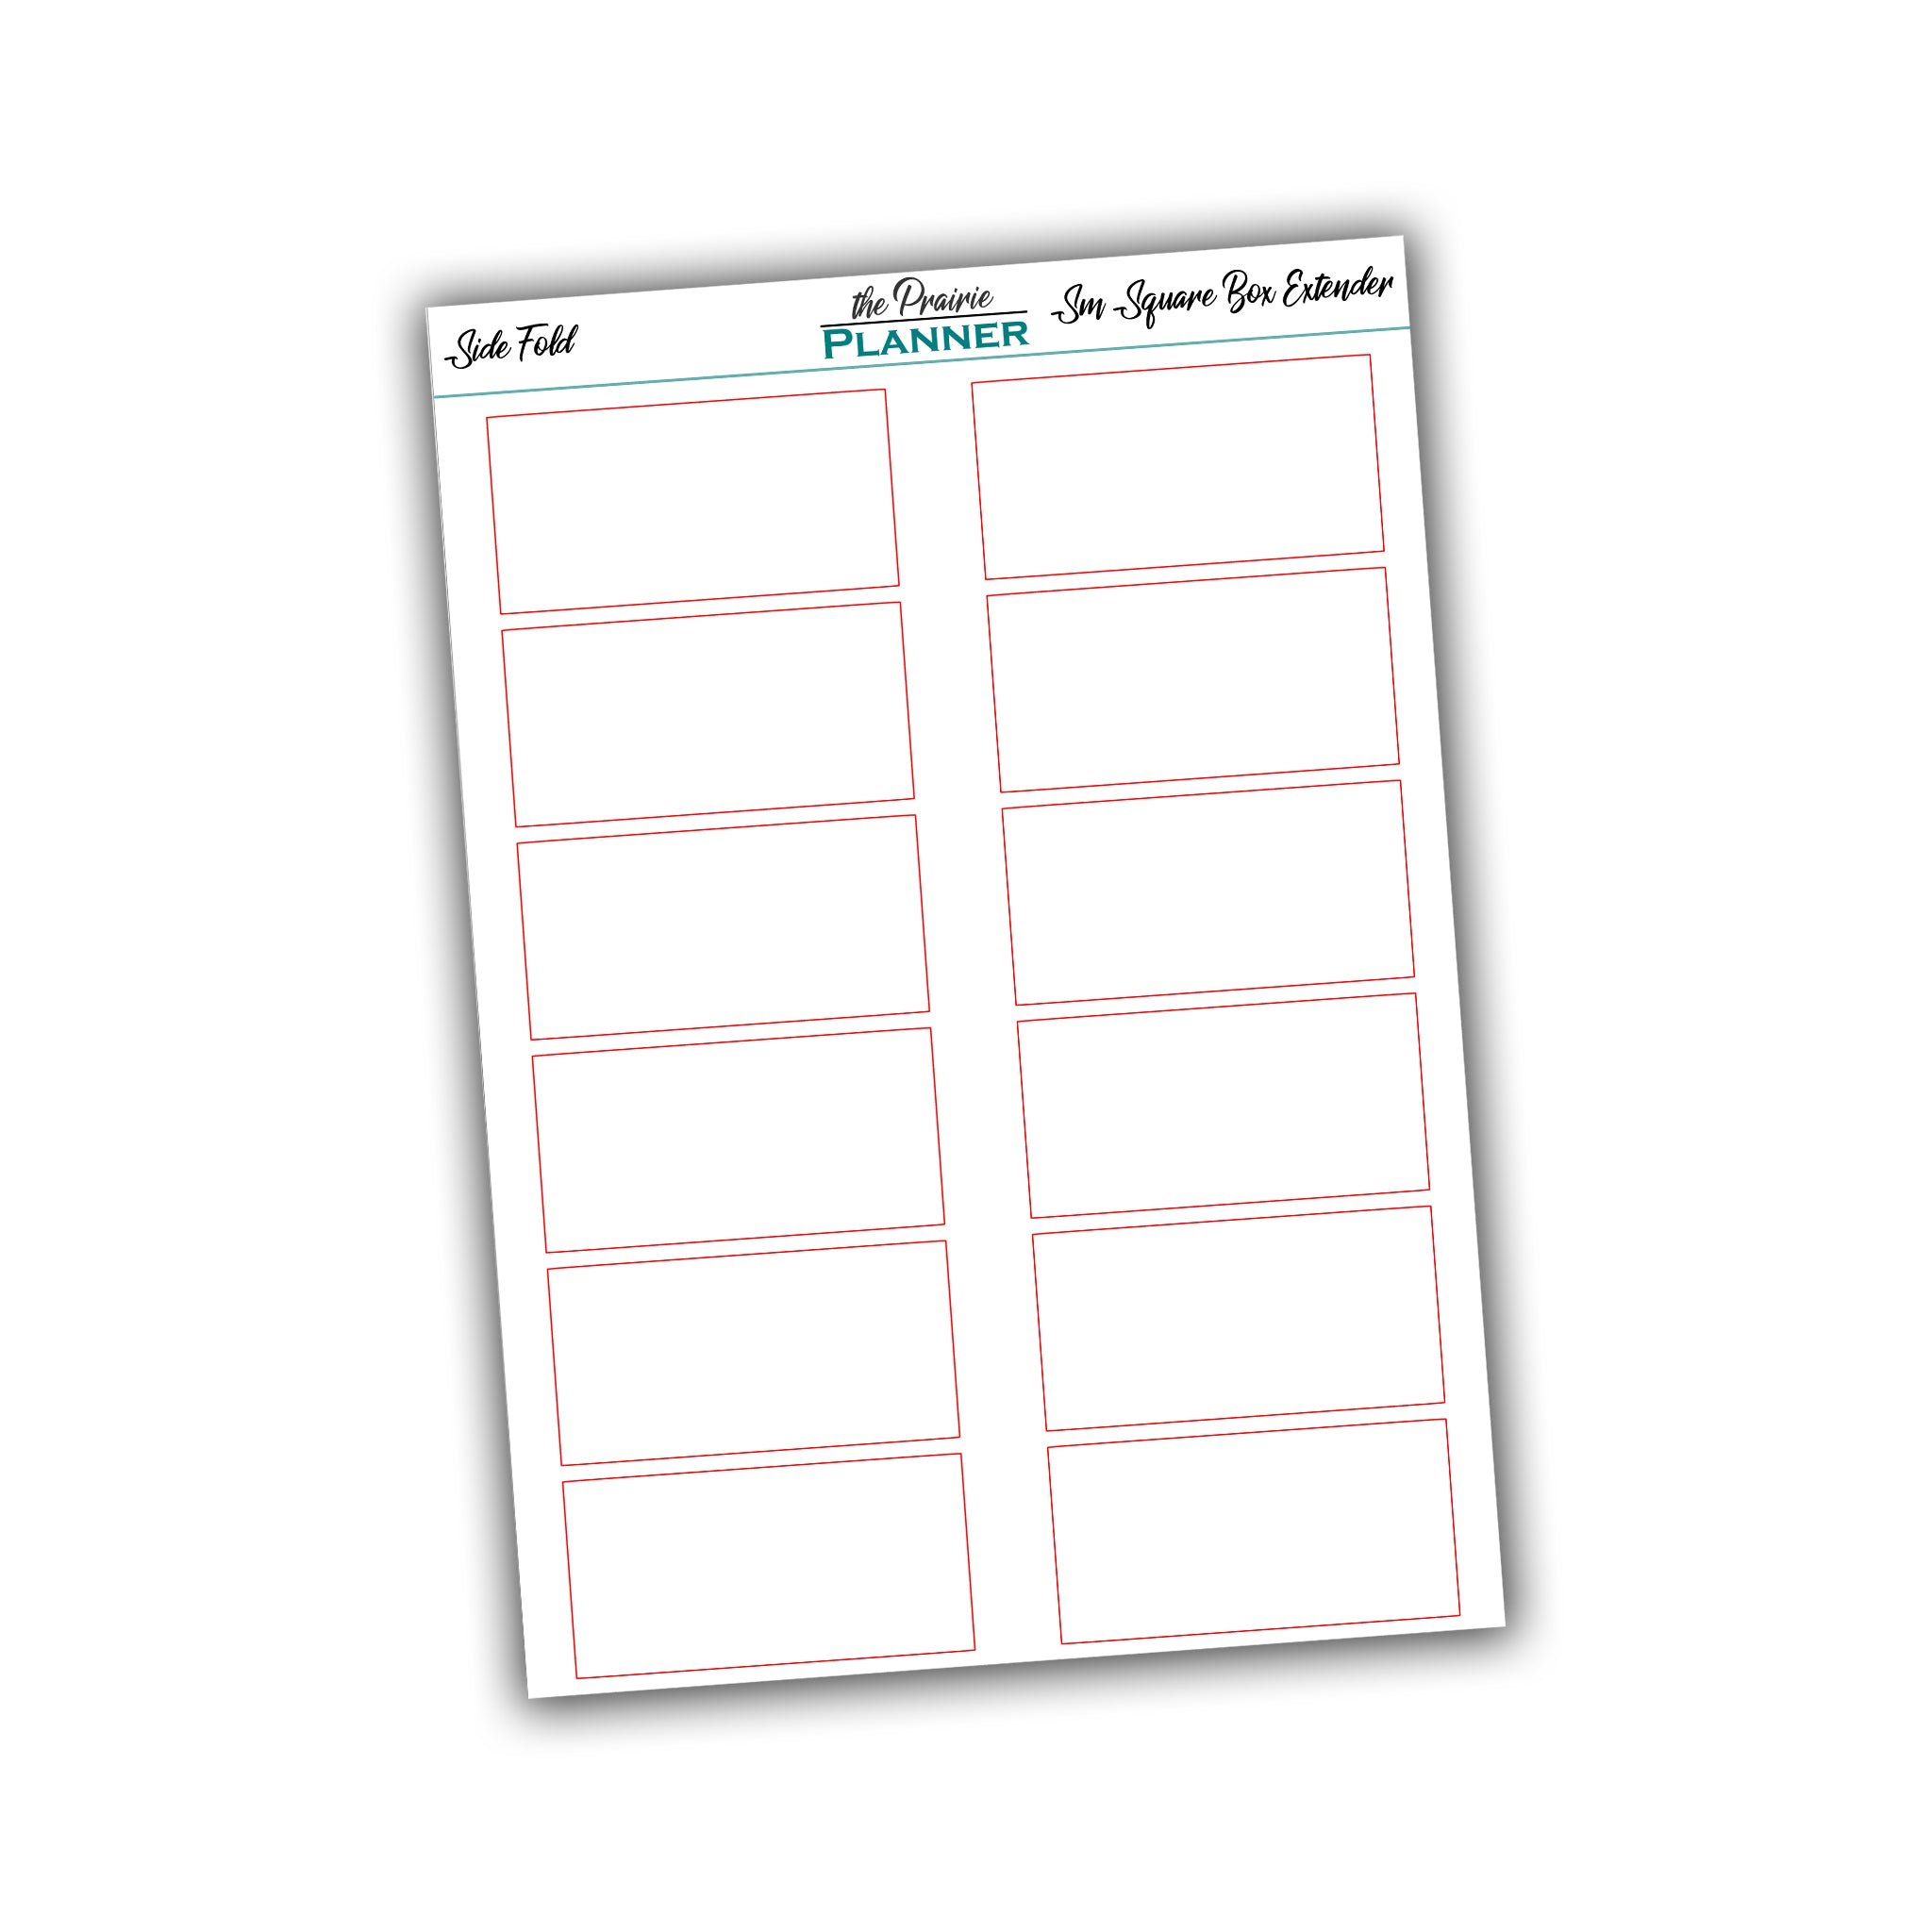 Small Squared Box Extenders - Side Fold - Planner Stickers